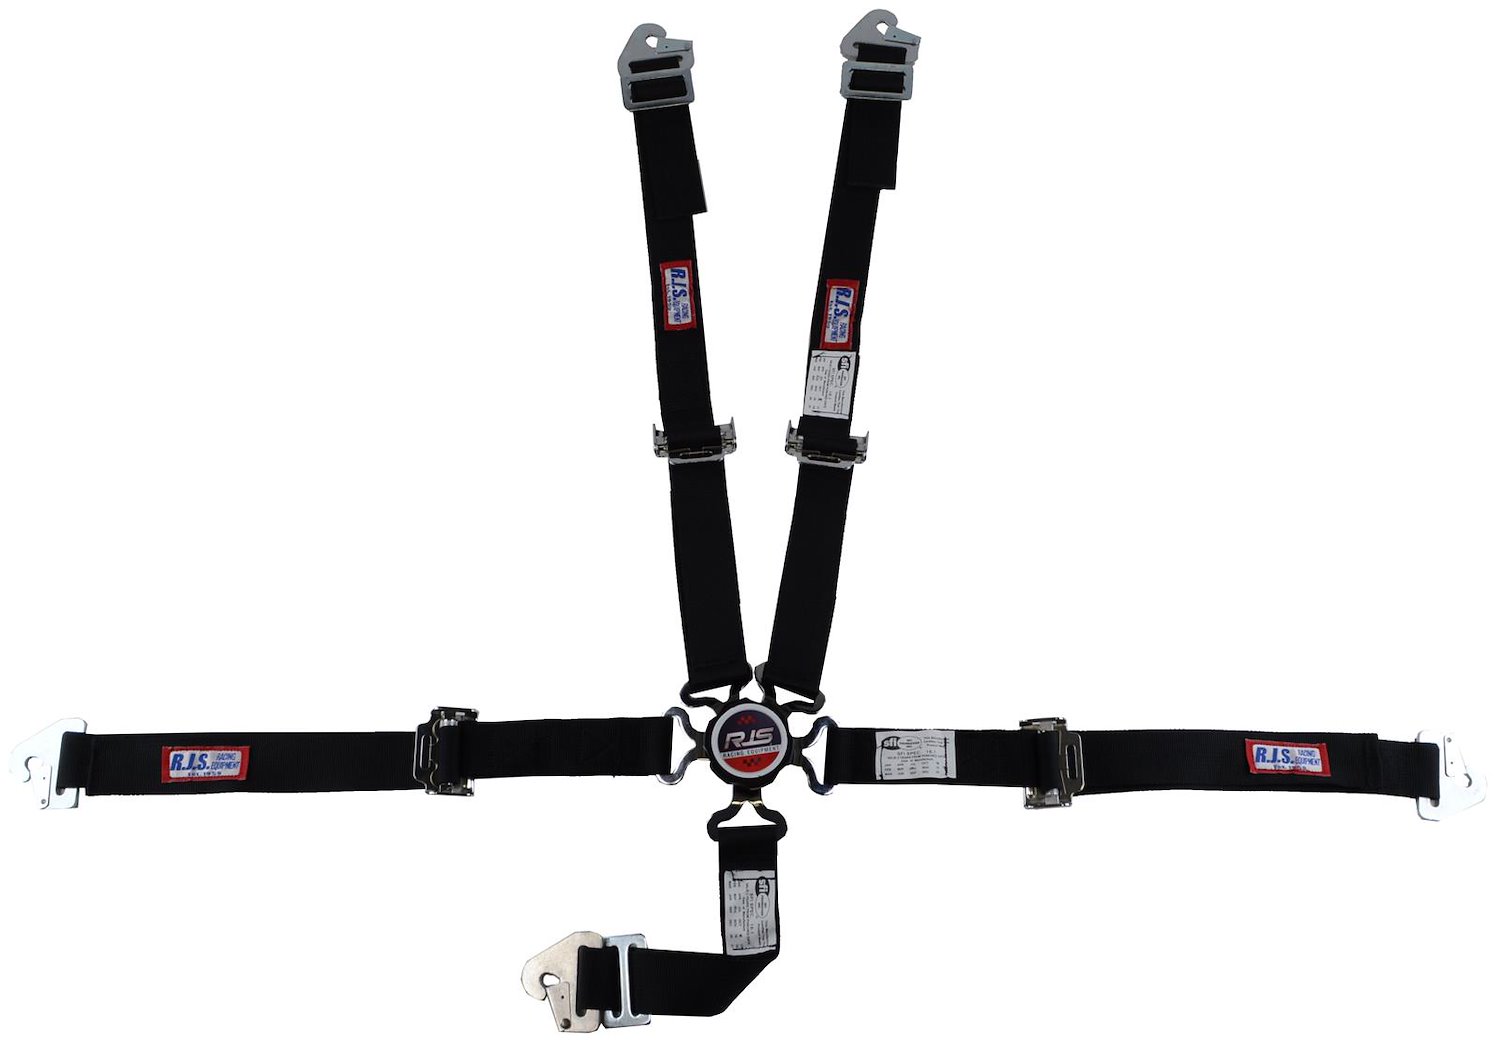 SFI 16.1 CAM-LOCK HARNESS 2 PULL UP Lap Belt 2 Shoulder Harness V ROLL BAR Mount 2 DOUBLE Sub ALL WRAP/BOLT ENDS GRAY